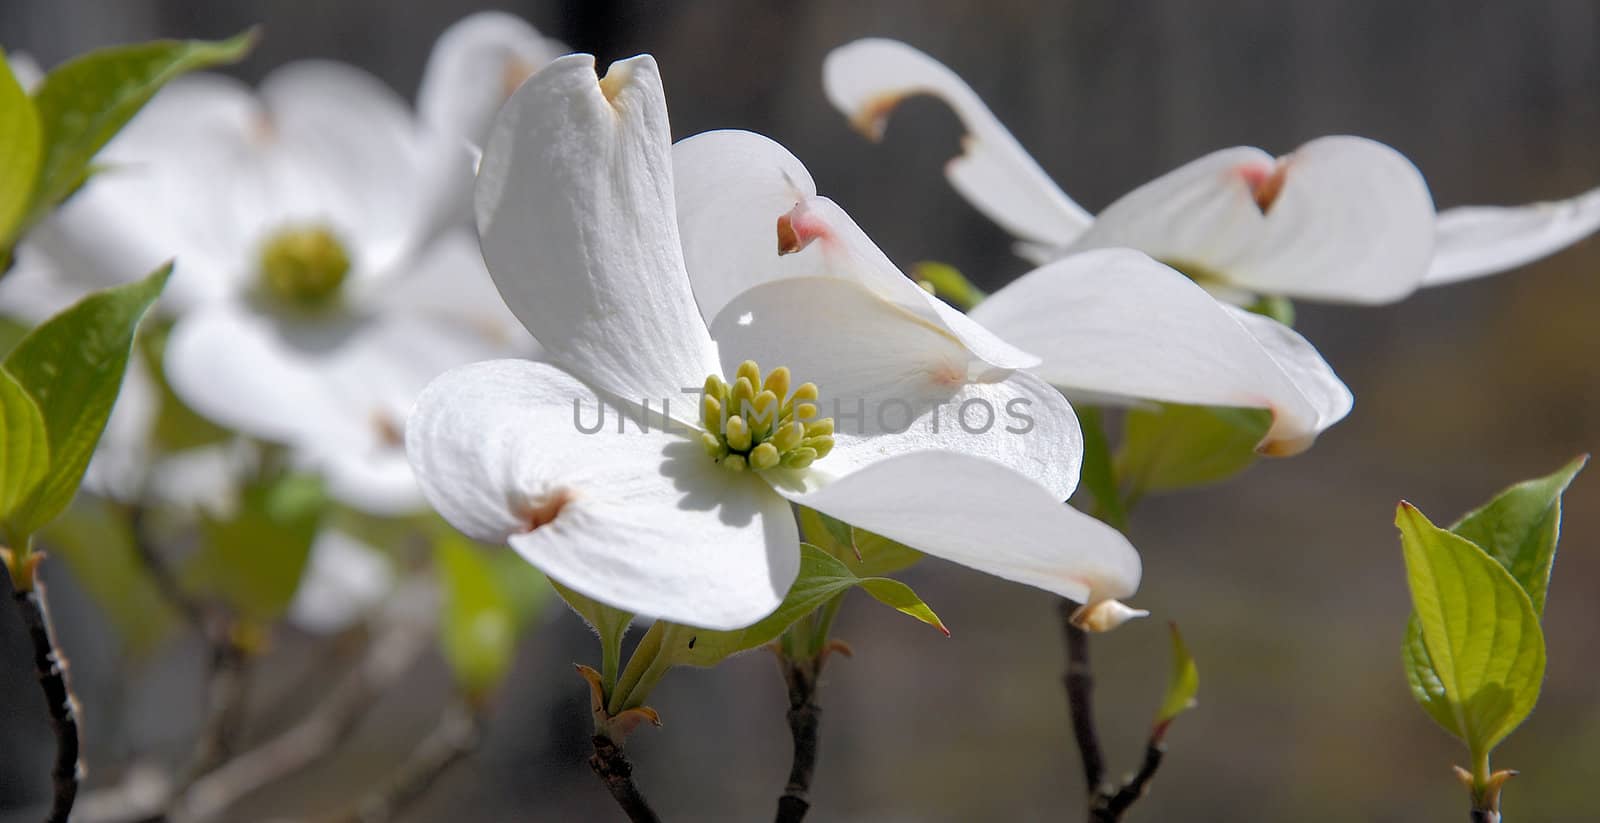 Dogwood blooms shown closeup during the spring of the year